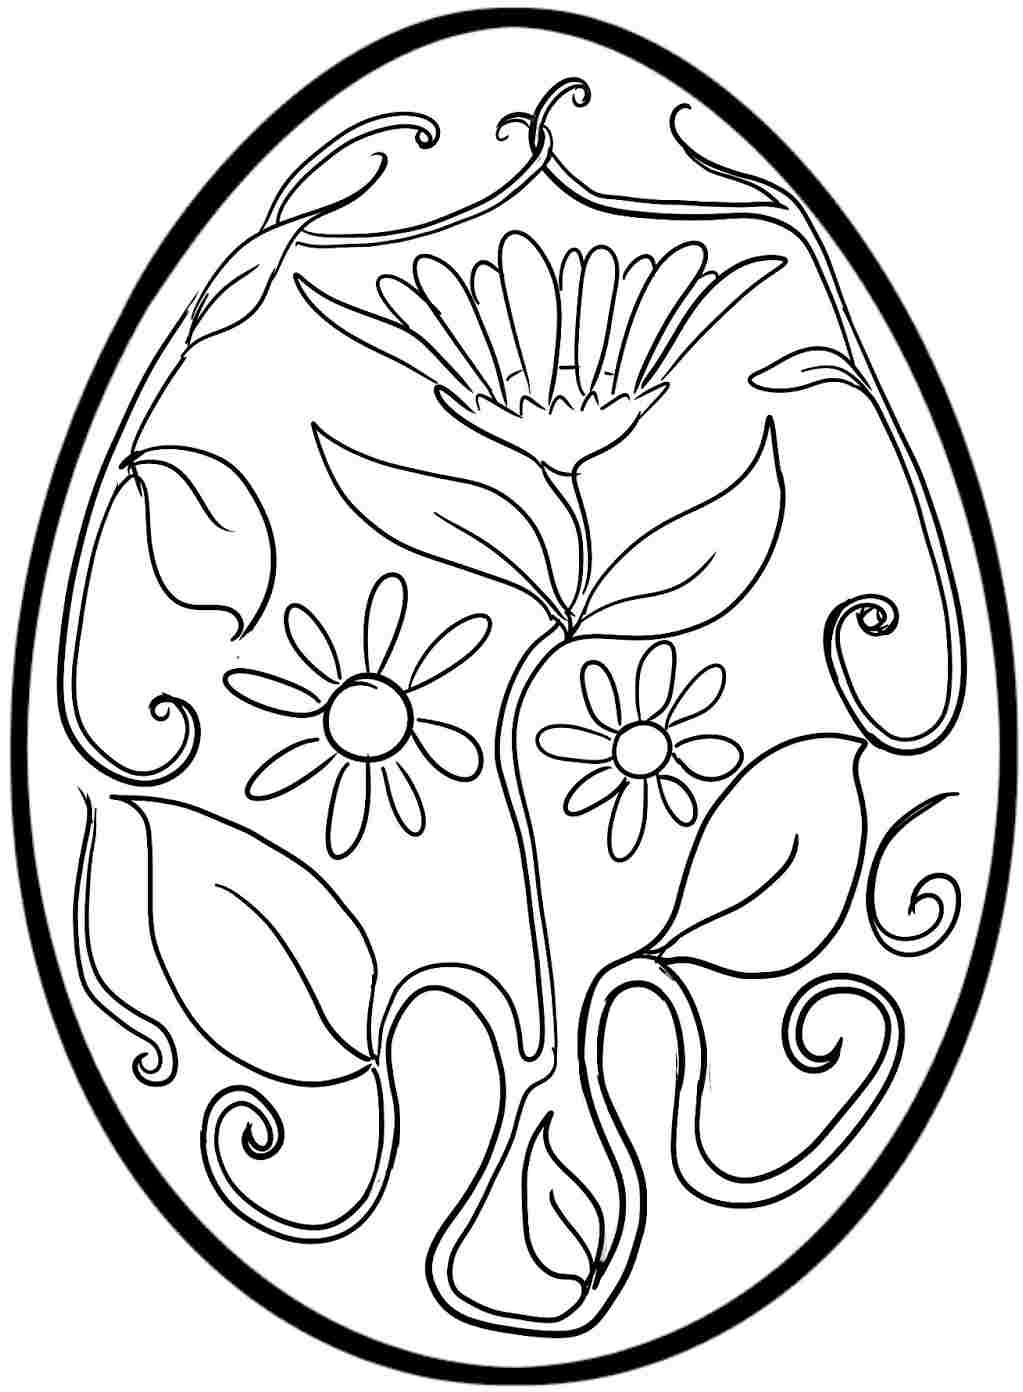 Printable Easter Egg Coloring Pages At GetColorings Free 